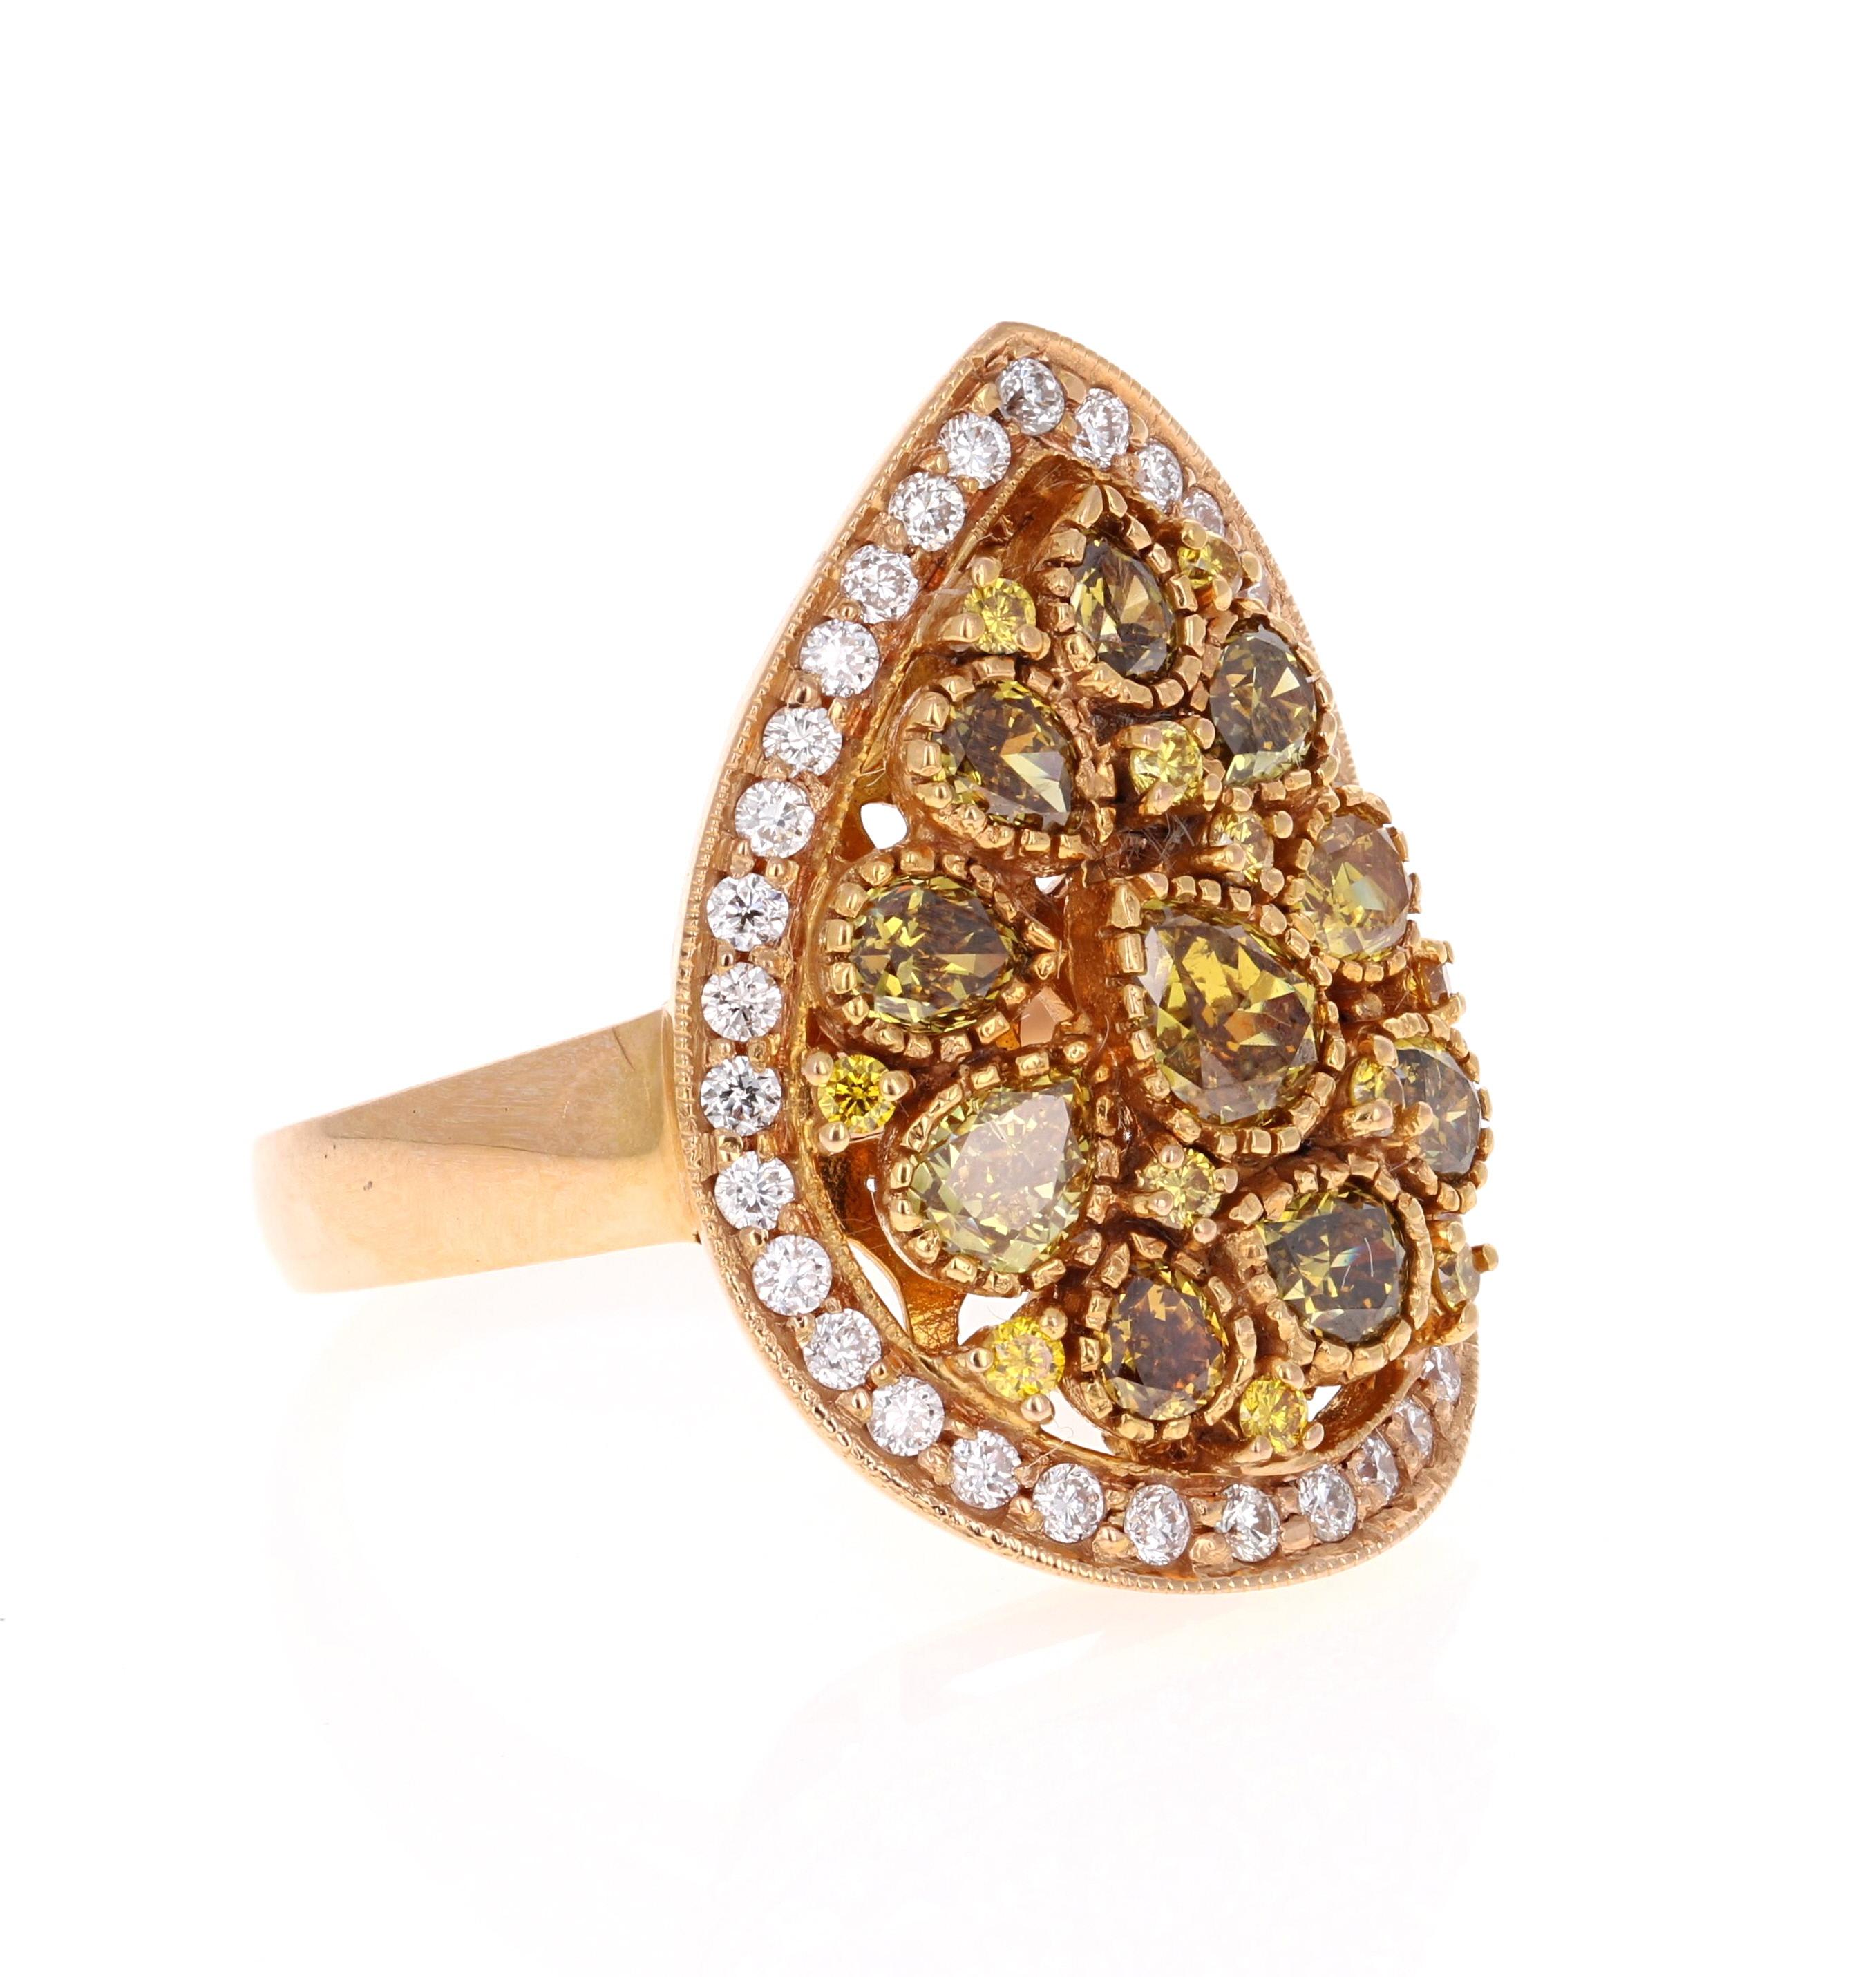 This magnificent beauty has fancy pear cut natural diamonds floating around throughout the ring. It has natural Brown Diamond Pear Cuts that weigh 1.91 Carats and has 11 Yellow Round Cut Diamonds that weigh 0.16 Carats. It is further embellished